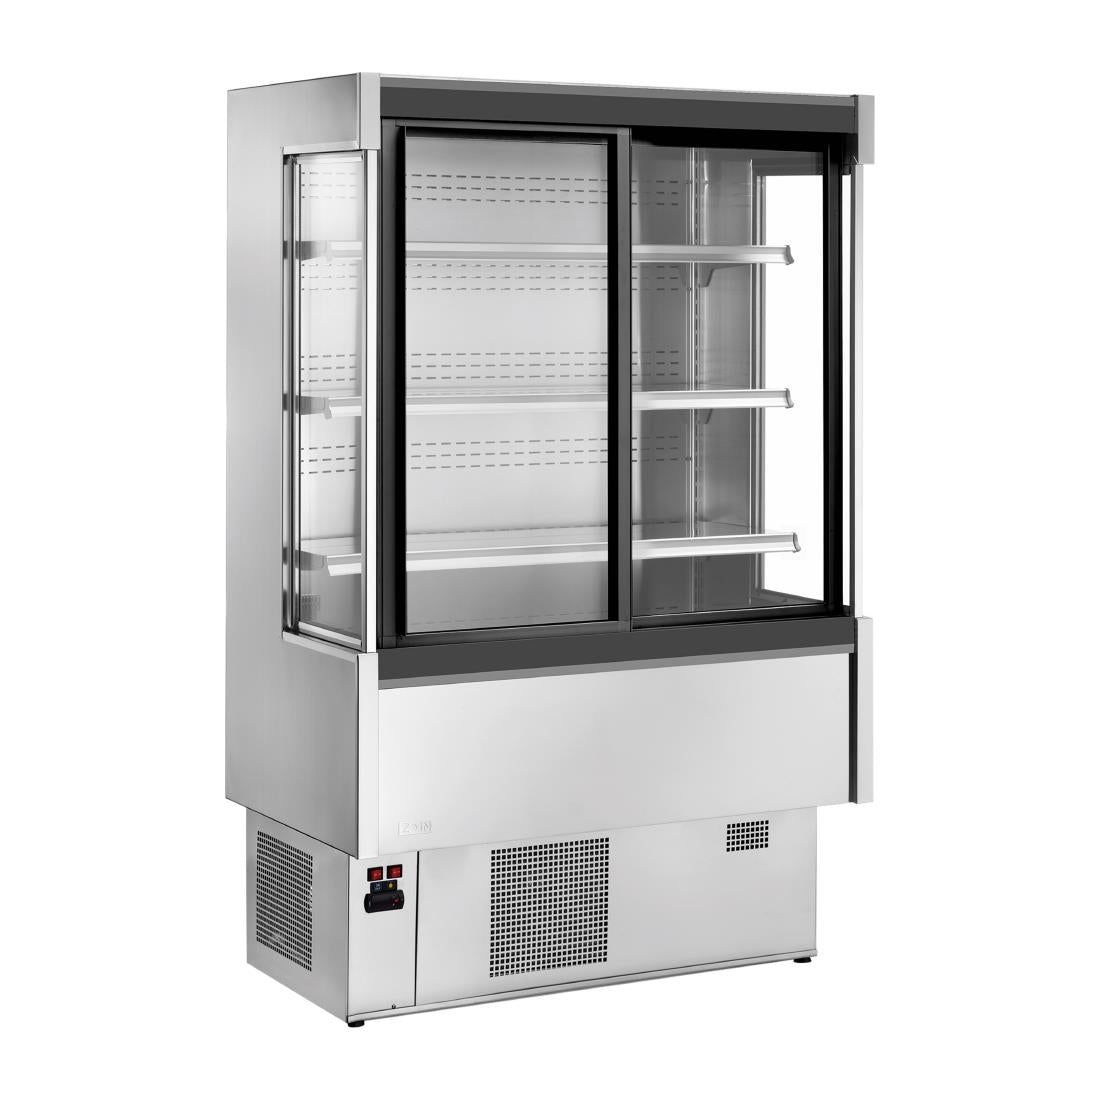 UA056-150 Zoin Silver Multideck Display Stainless Steel Finish with Sliding Doors 1500mm